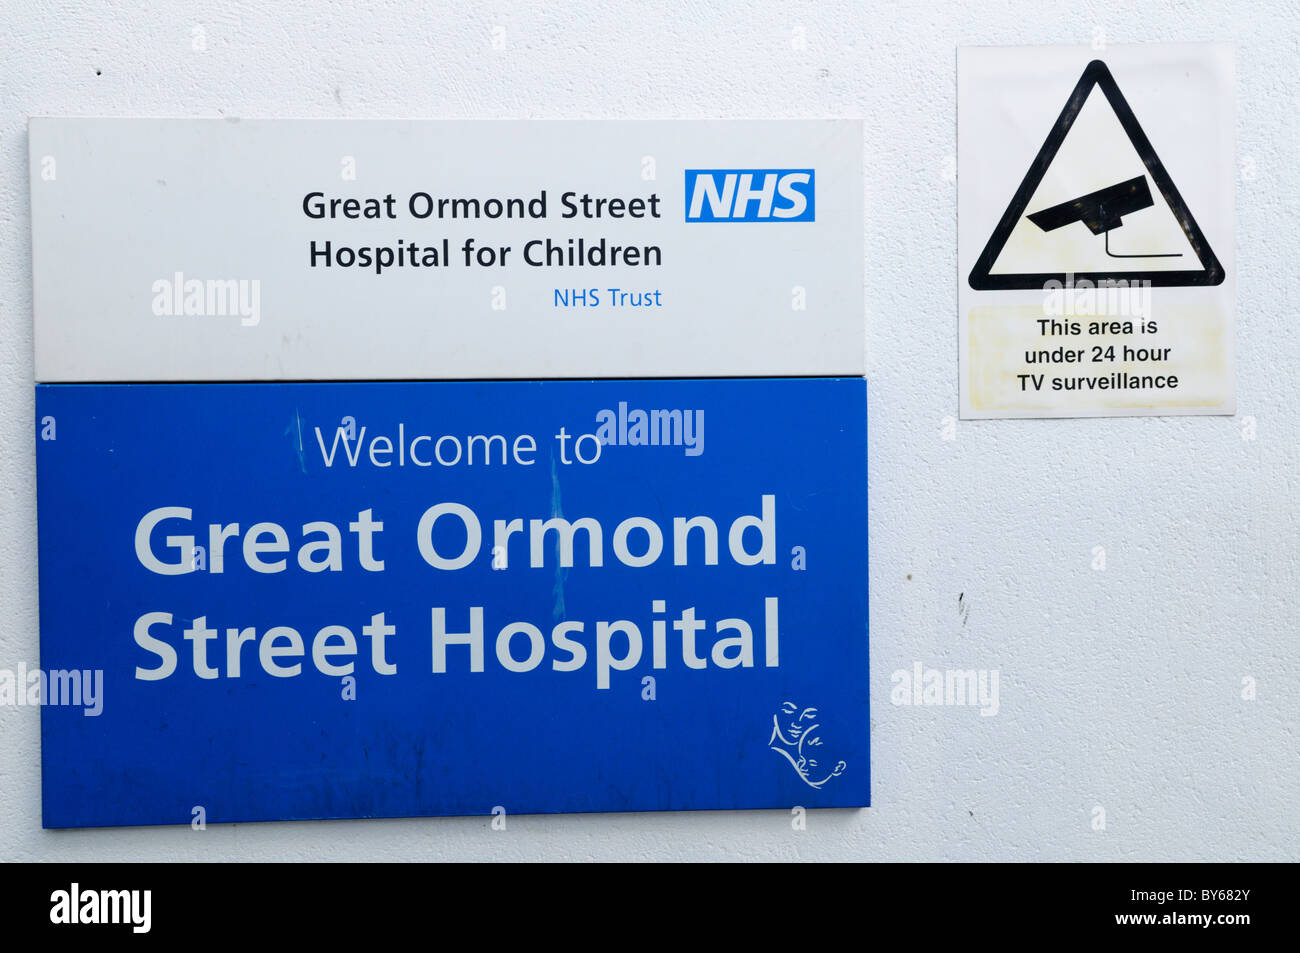 Welcome to Great Ormond Street Hospital Sign and CCTV surveillance warning notice, London, England, UK Stock Photo